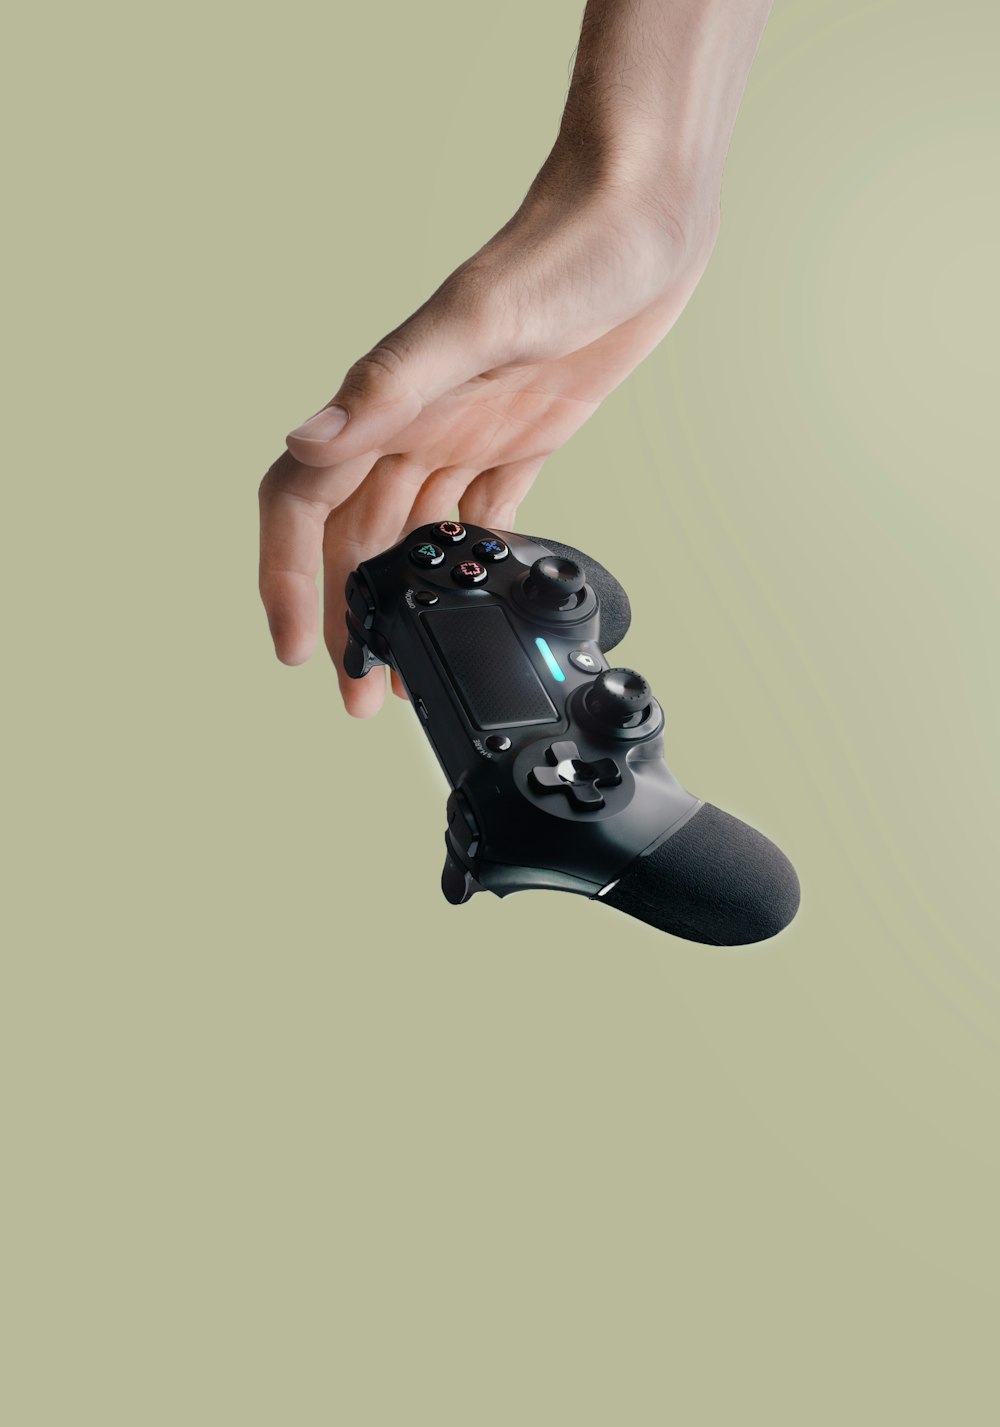 person holding Sony DualShock 4 wireless controller